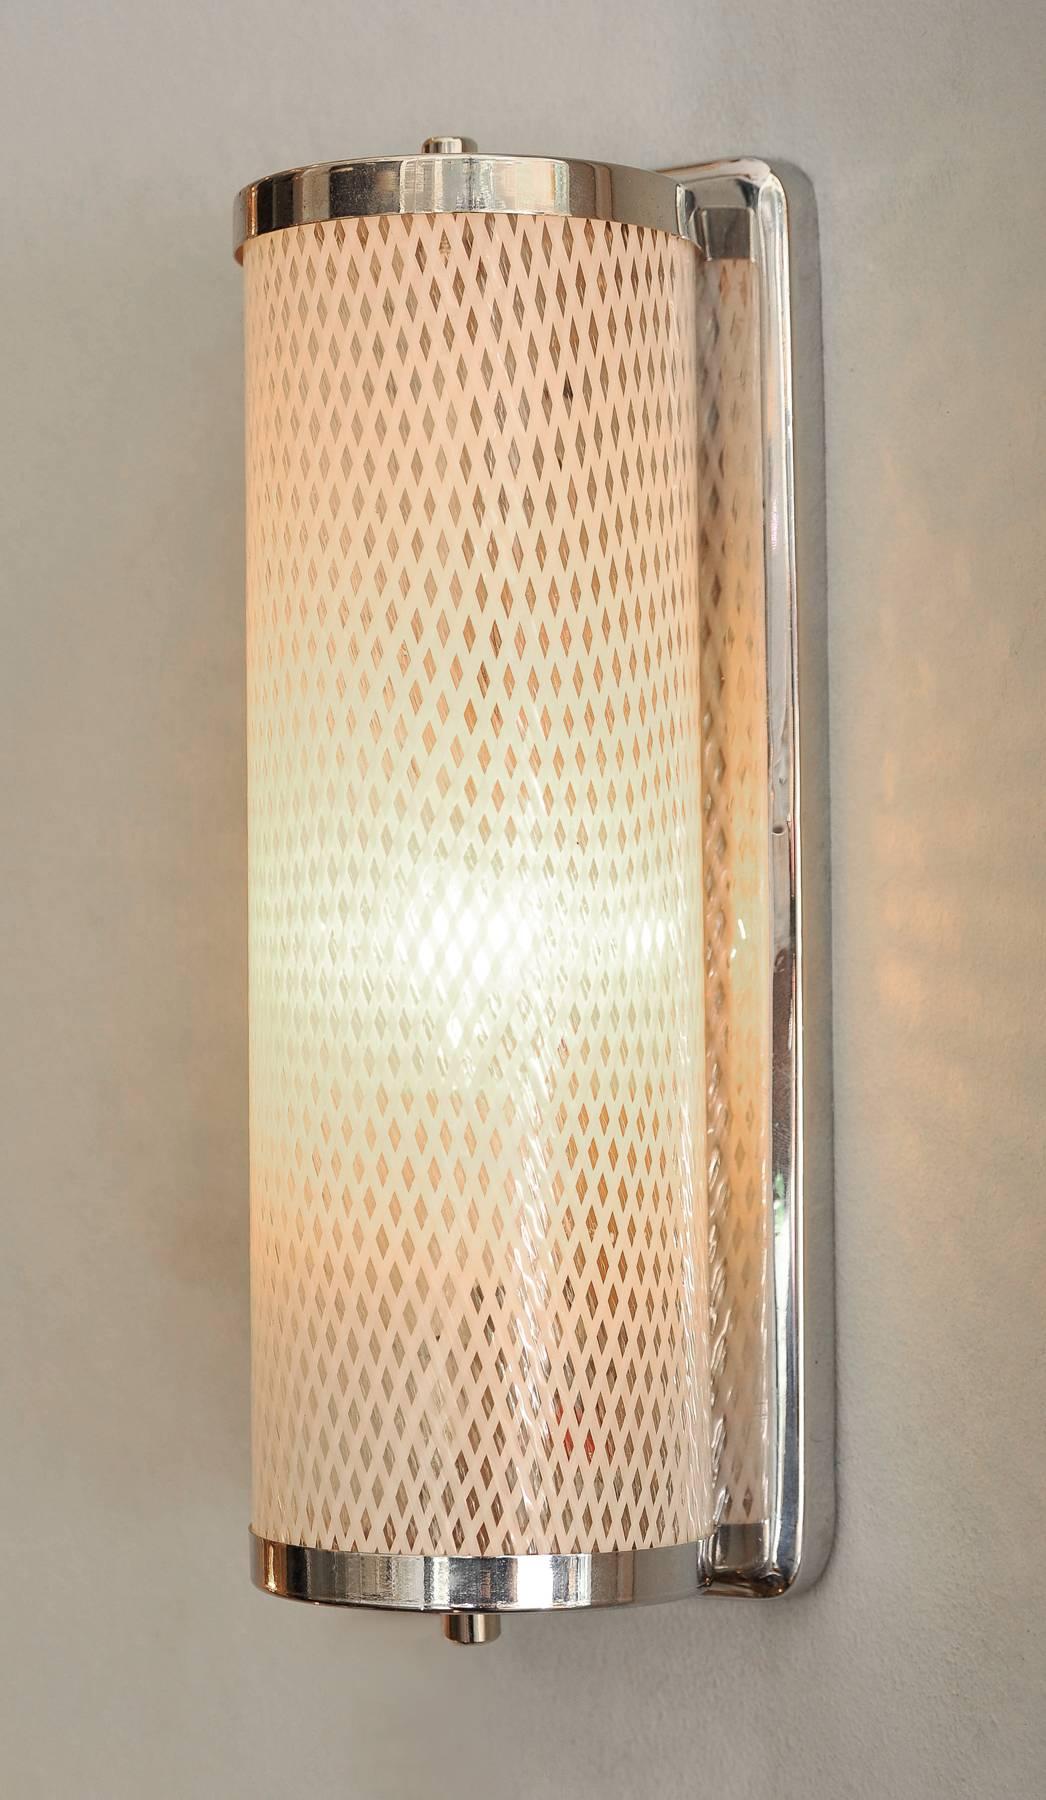 Italian wall lights? with chrome brackets holding vertical Murano glass shades with 'lattice' design.